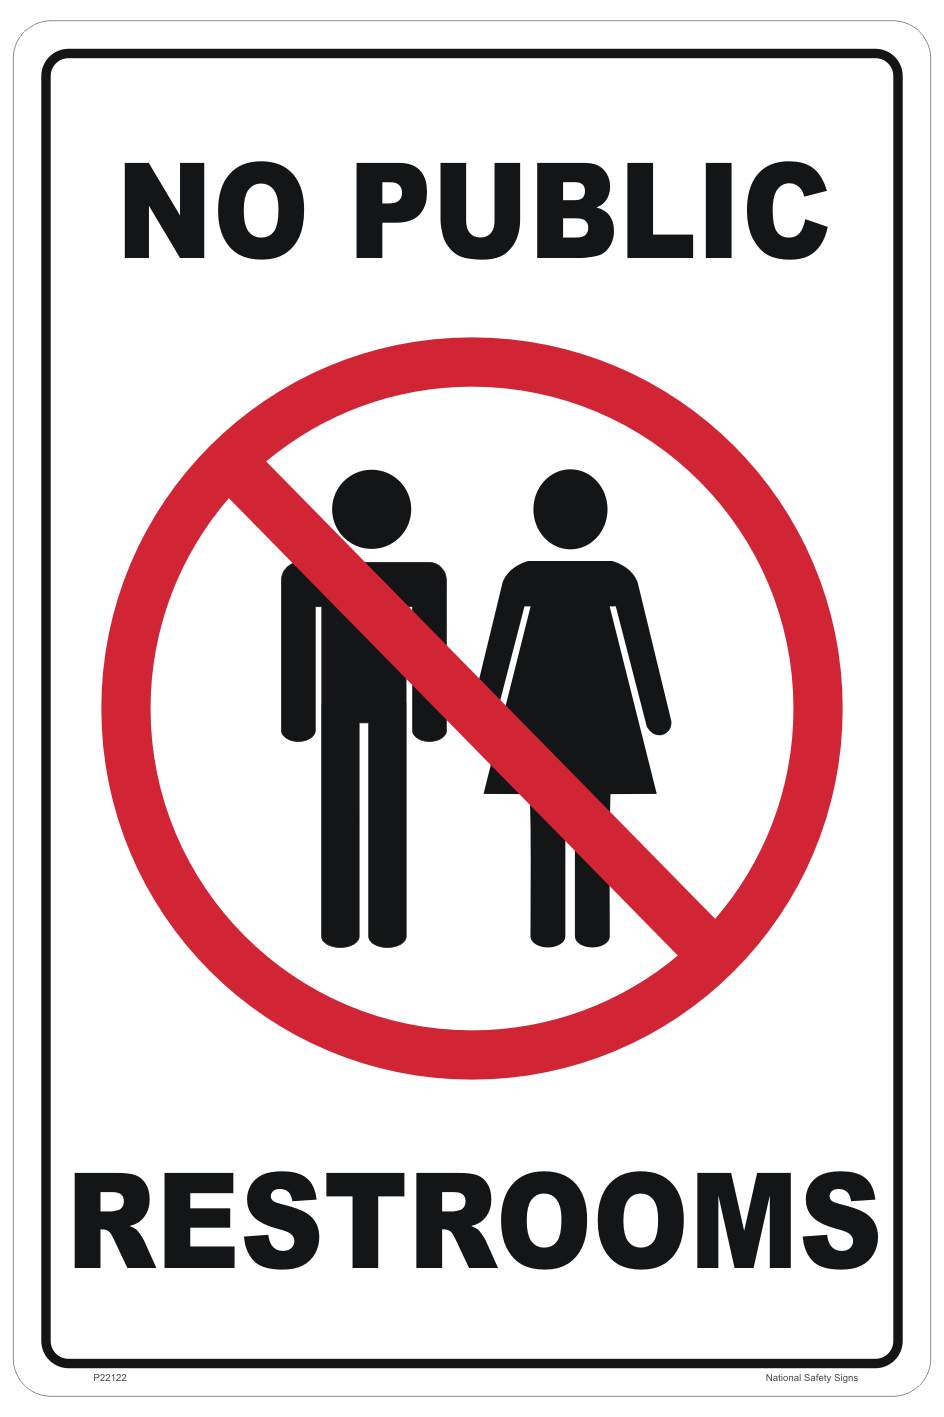 toilet-signs-restroom-signs-national-safety-signs-australia